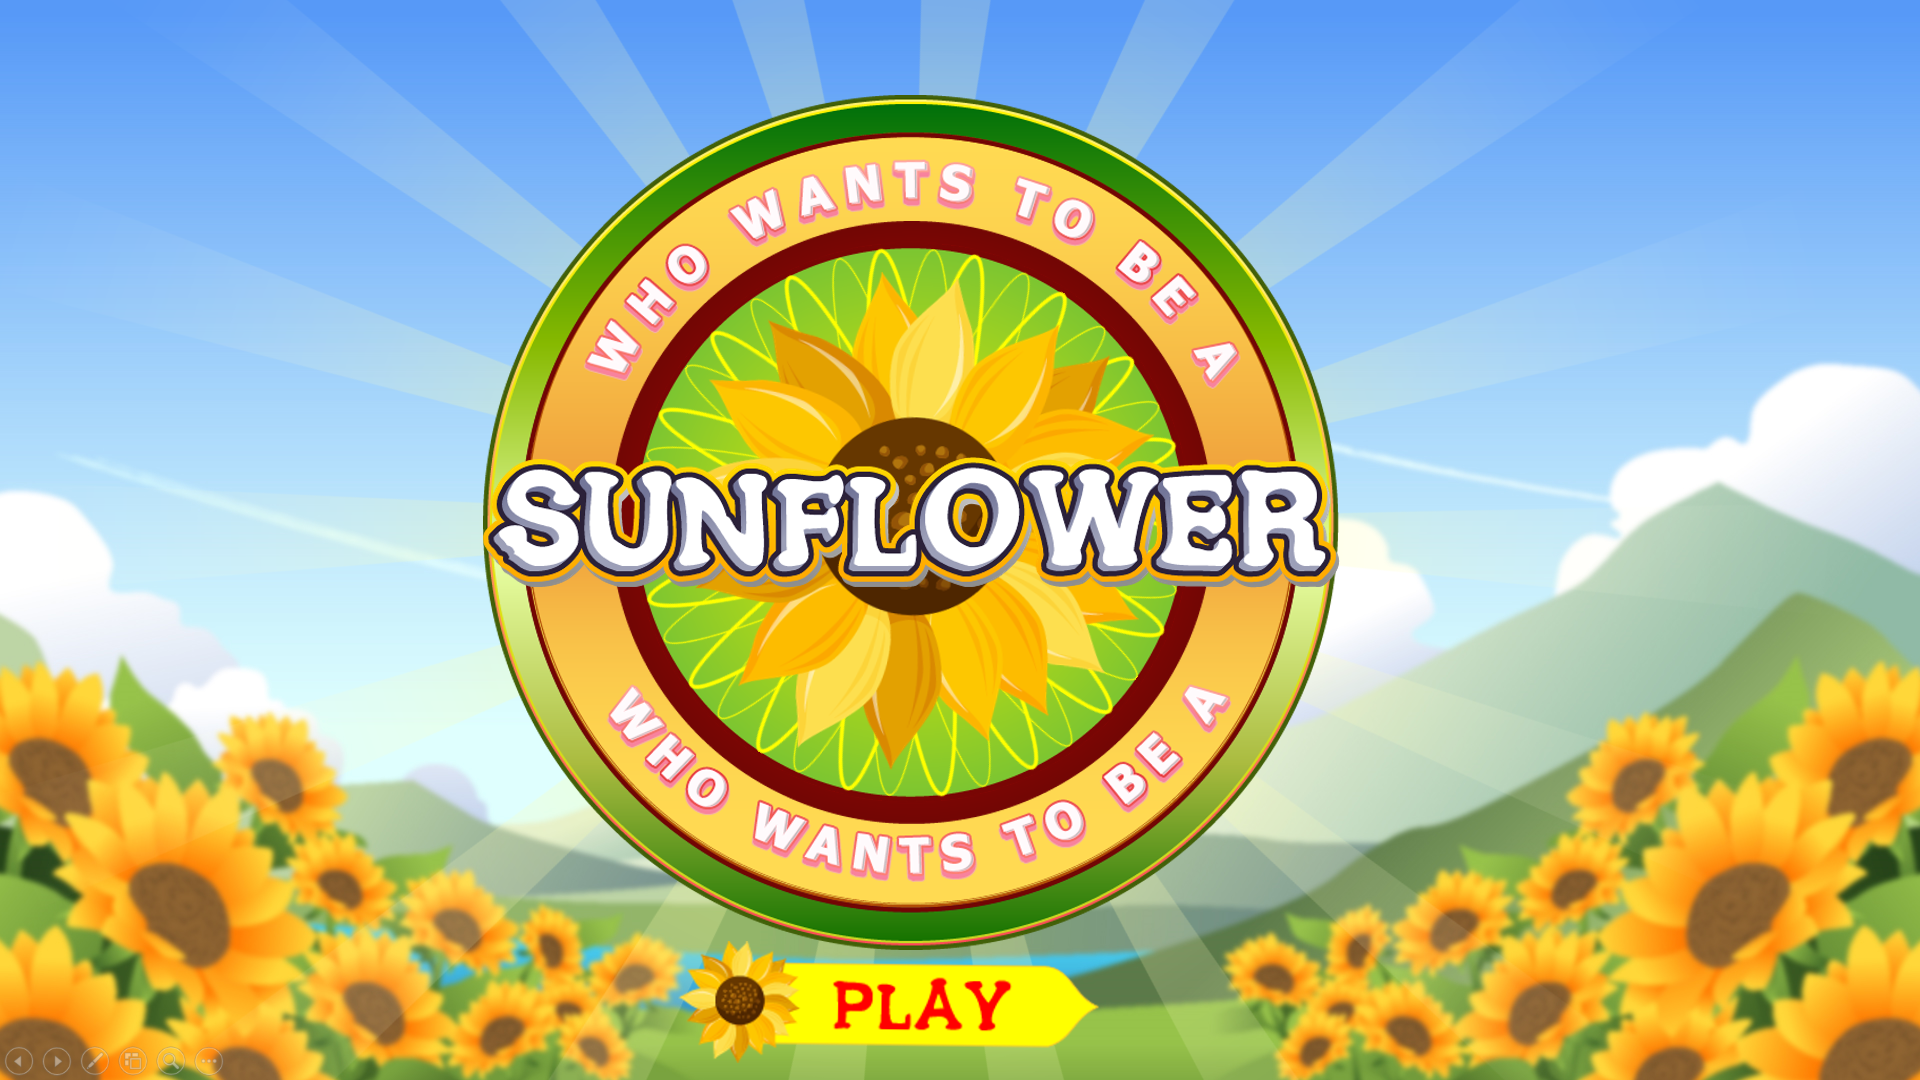 [Miễn Phí] 2 mẫu game có sẵn của game who wants to be sunflower